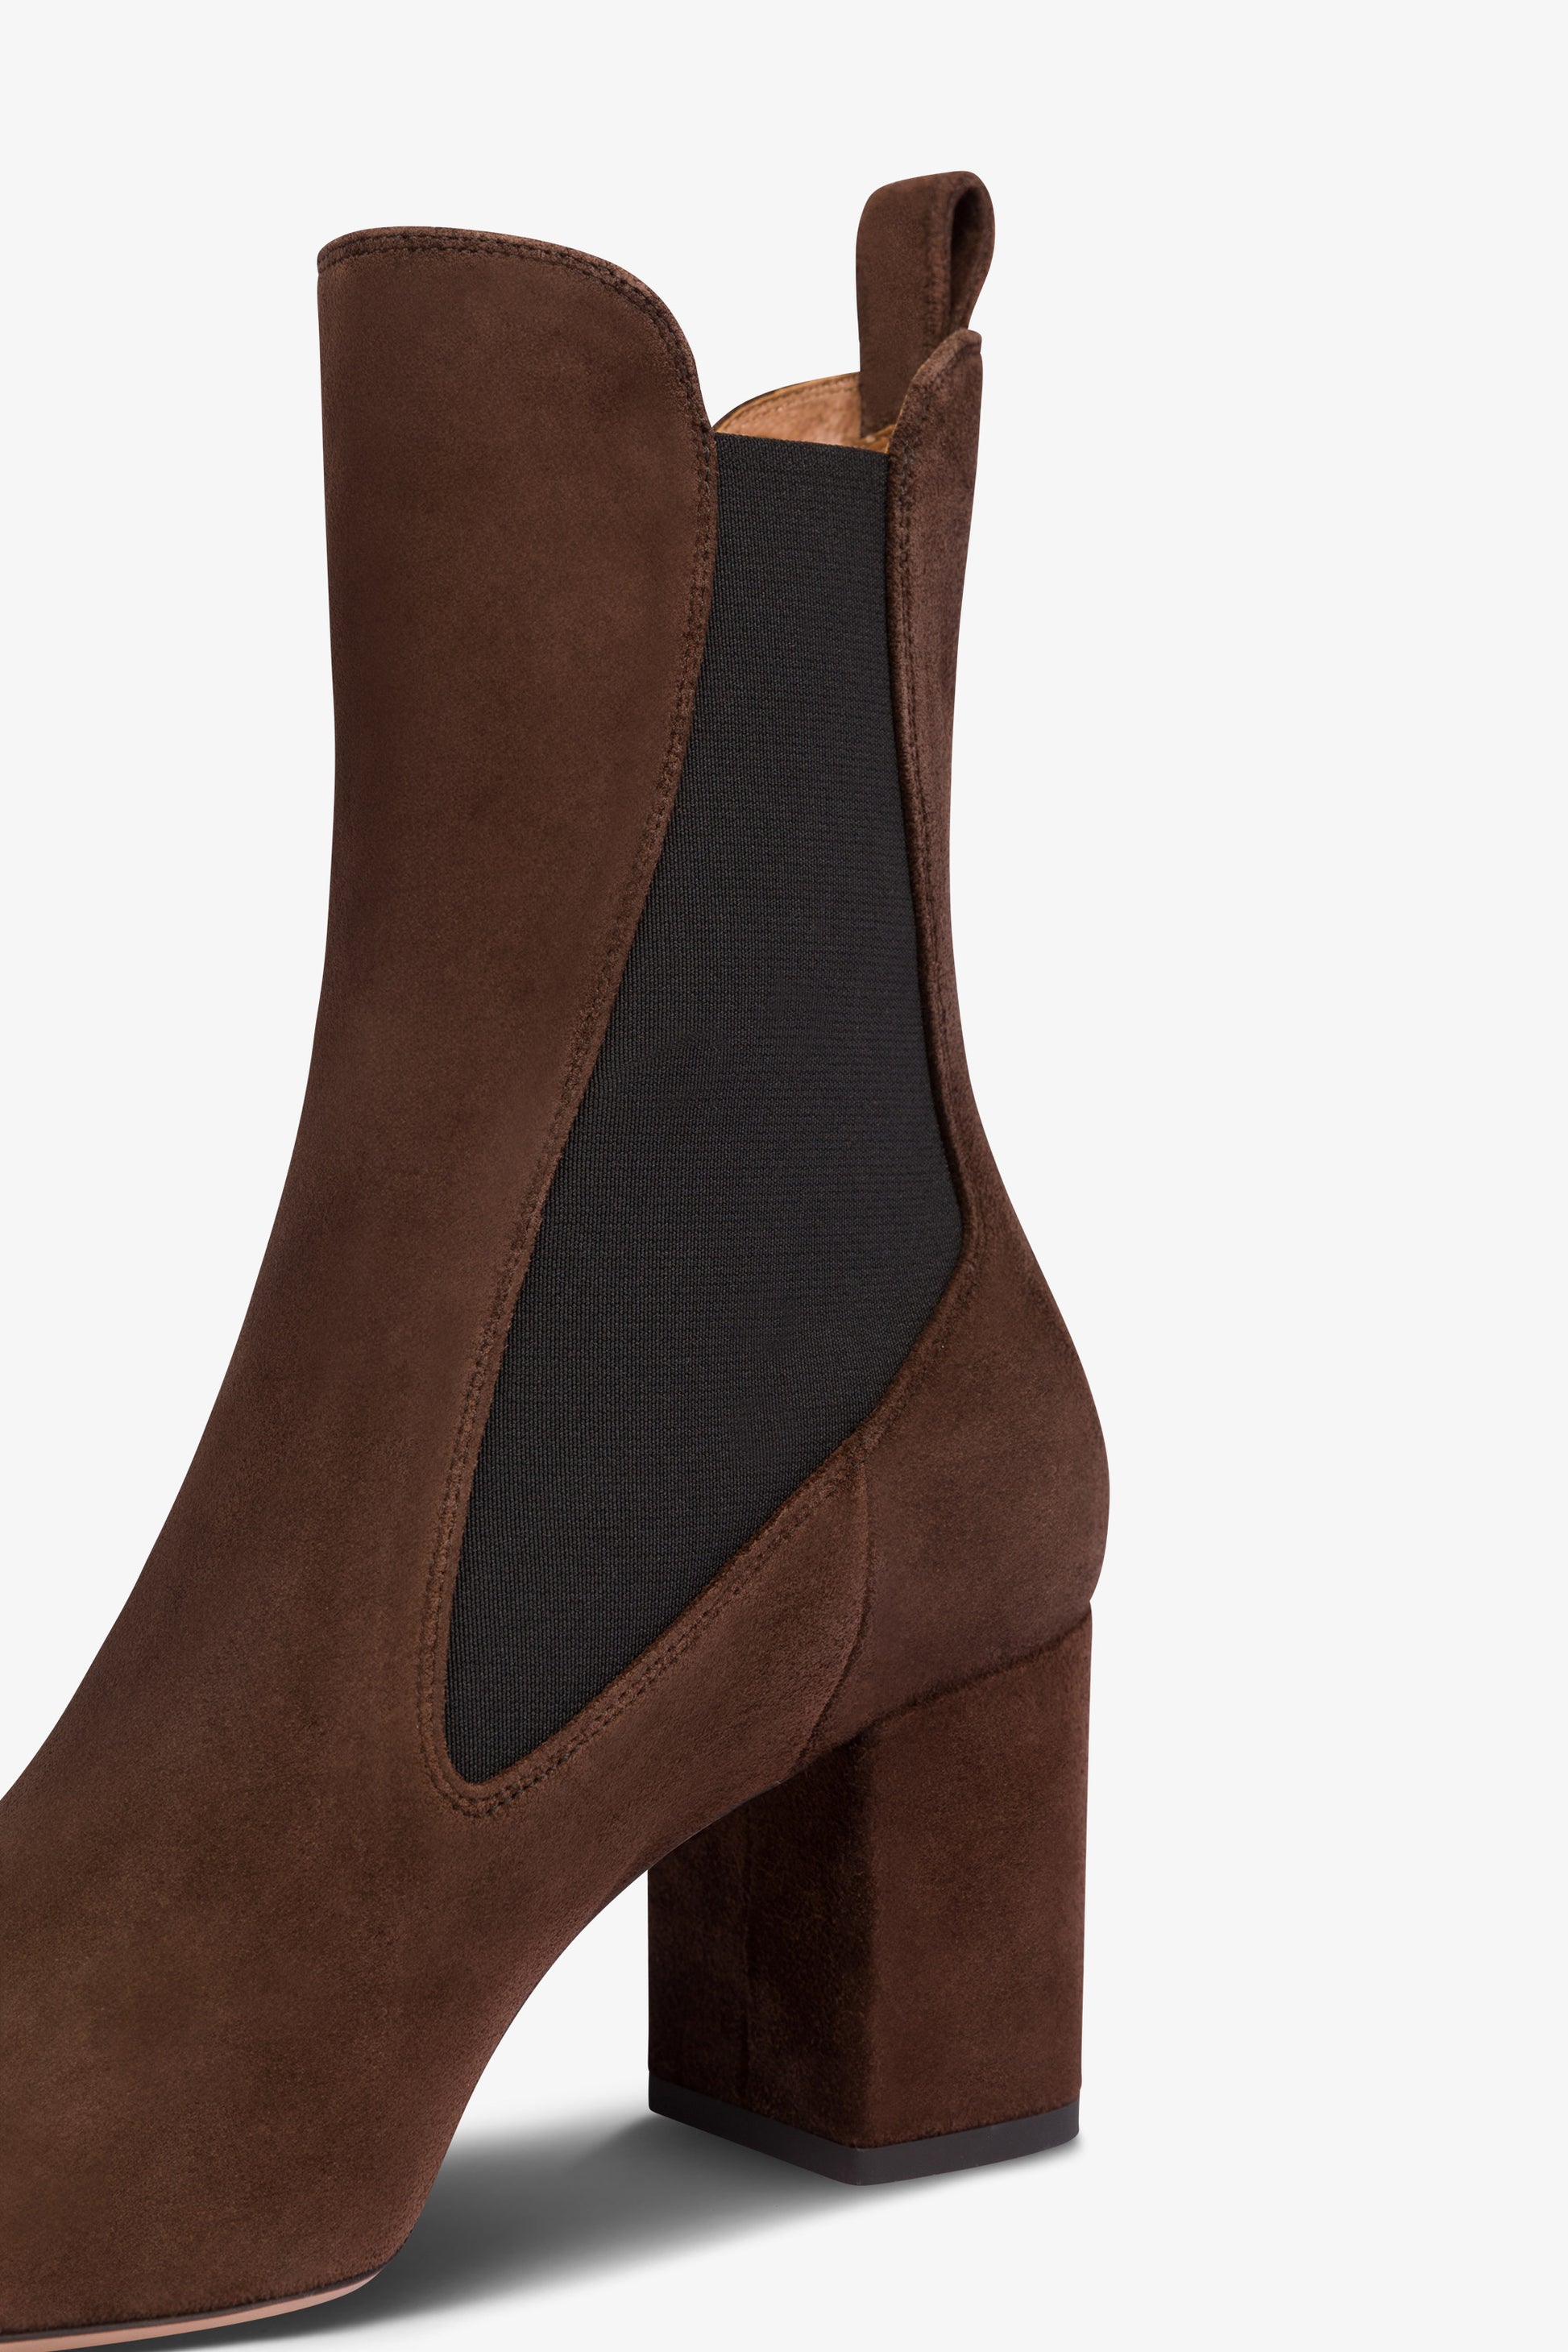 Pointed ankle boots in soft pepper suede leather